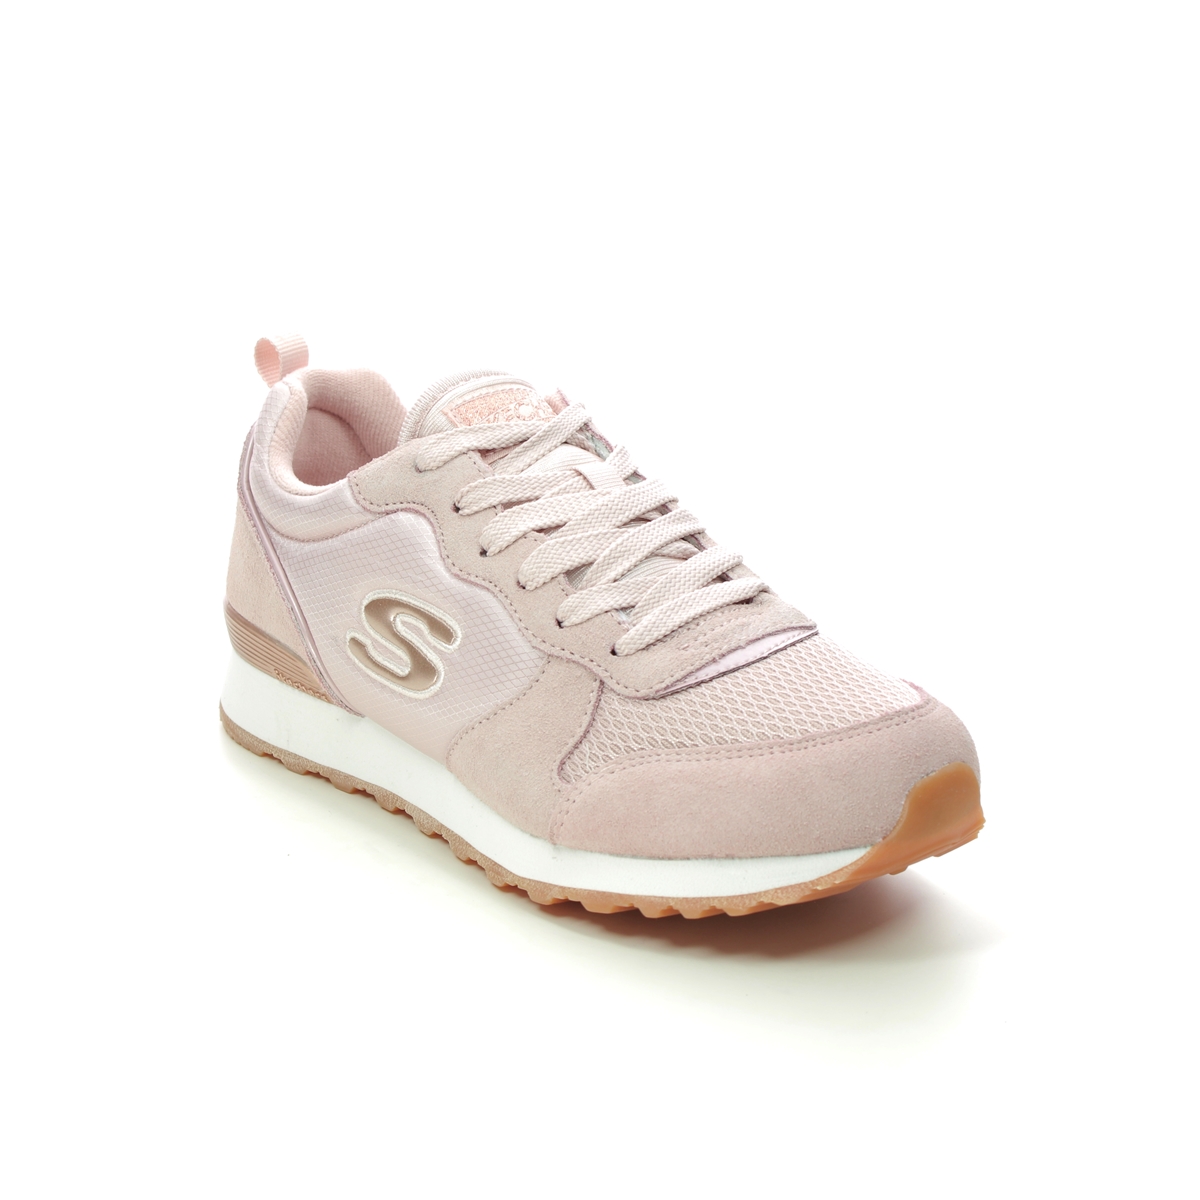 Skechers Og 85 Gold Gurl Blush Pink Womens Trainers 111 In Size 4 In Plain Blush Pink